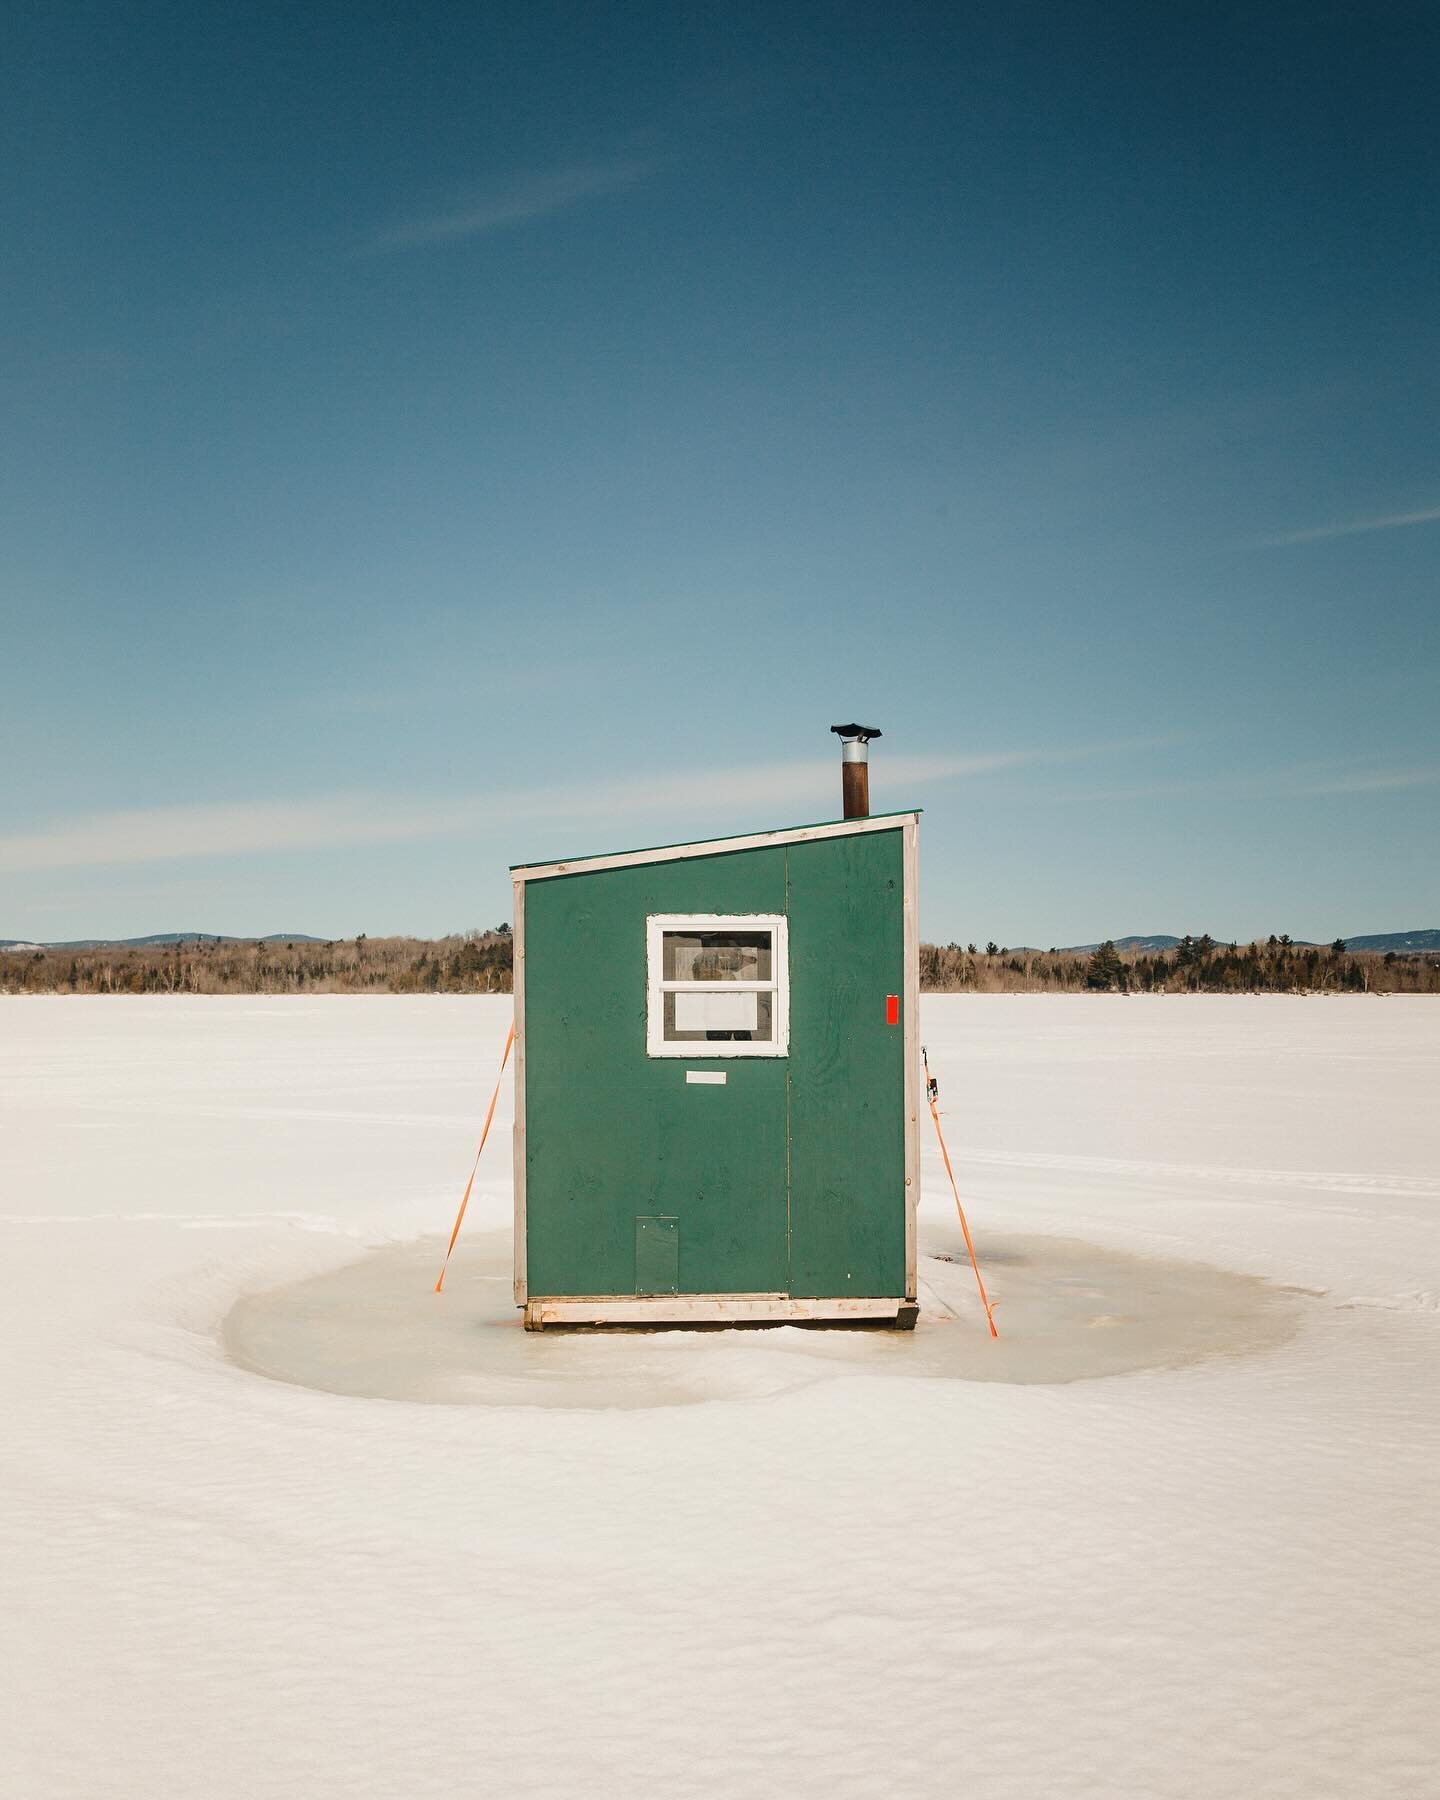 Last winter, found ourselves on Wood Pond in Jackman chatting with folks for Guidebook 01: Outdoor Recreation as they waited for their flags to waive back at them. Here&rsquo;s an excerpt: 

&ldquo;Today, ice fishing in Maine has transformed into a b